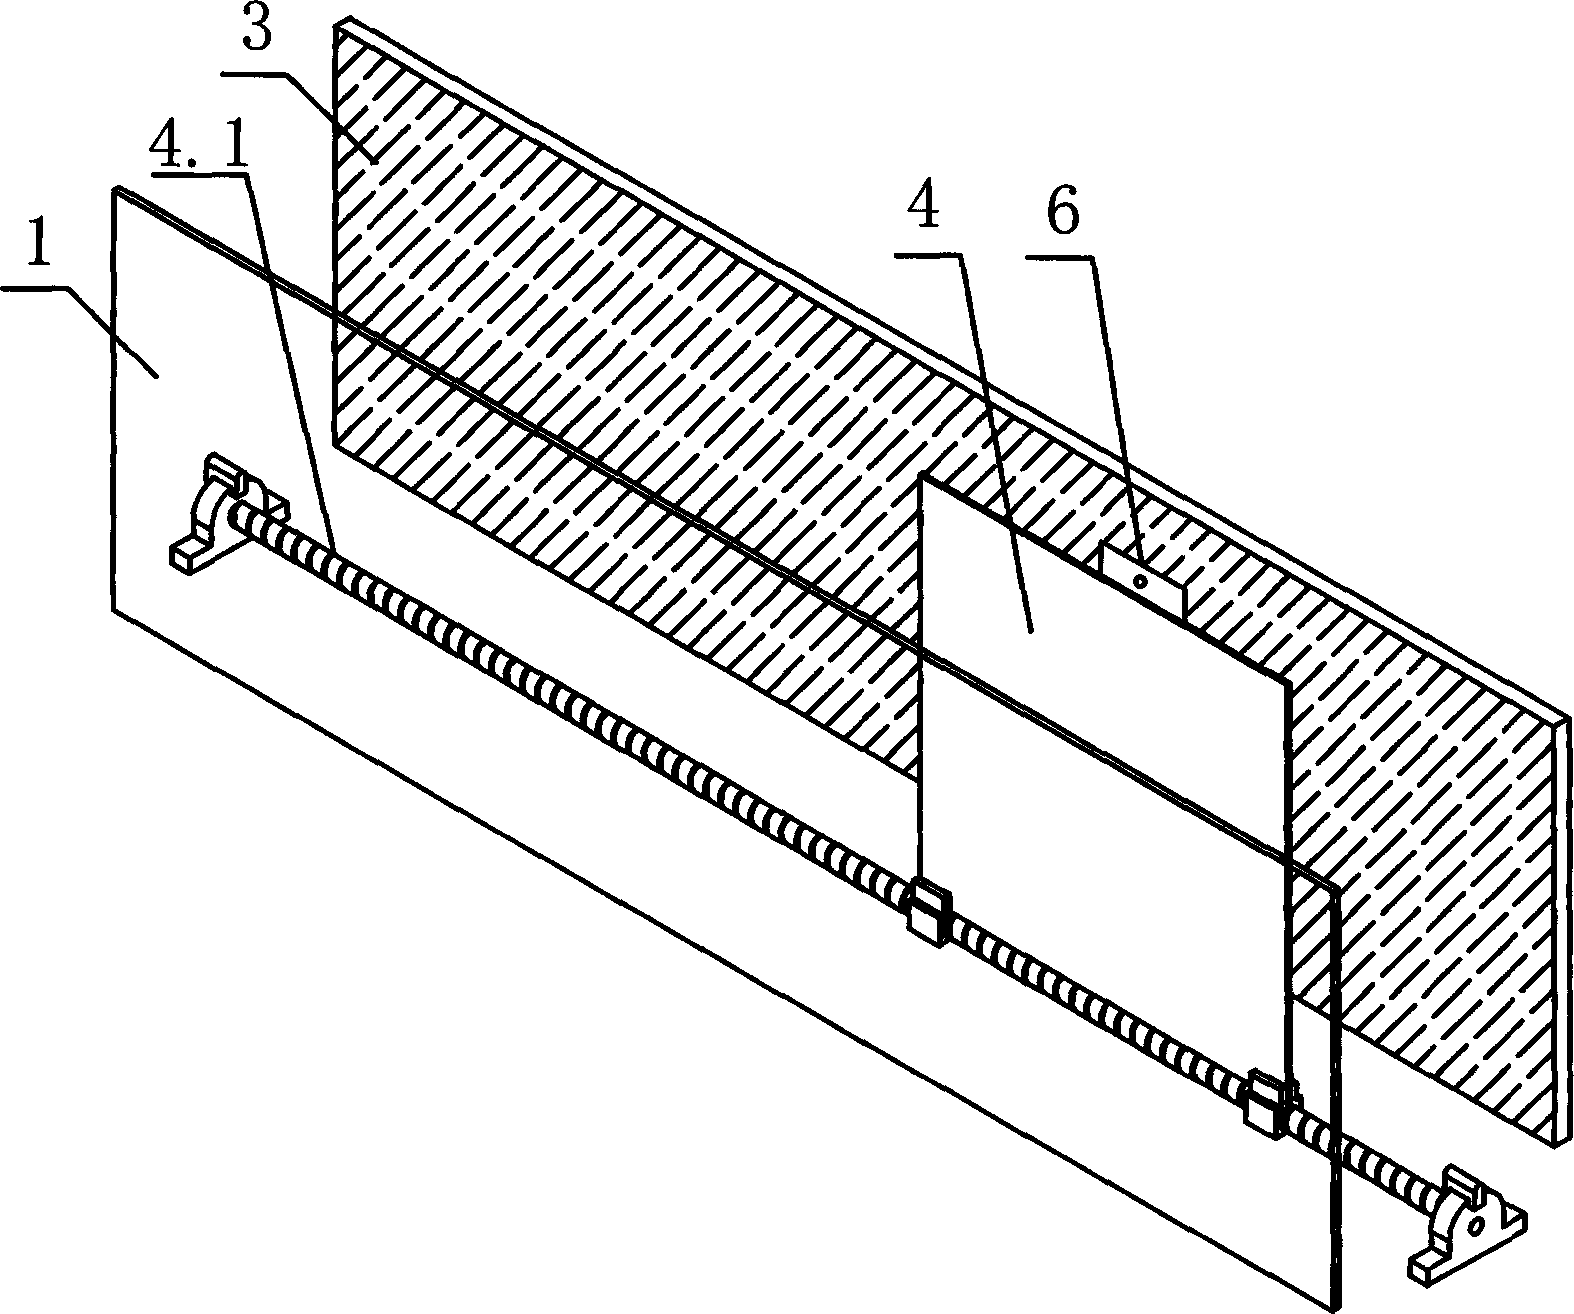 Control method of teaching blackboard writing projection system